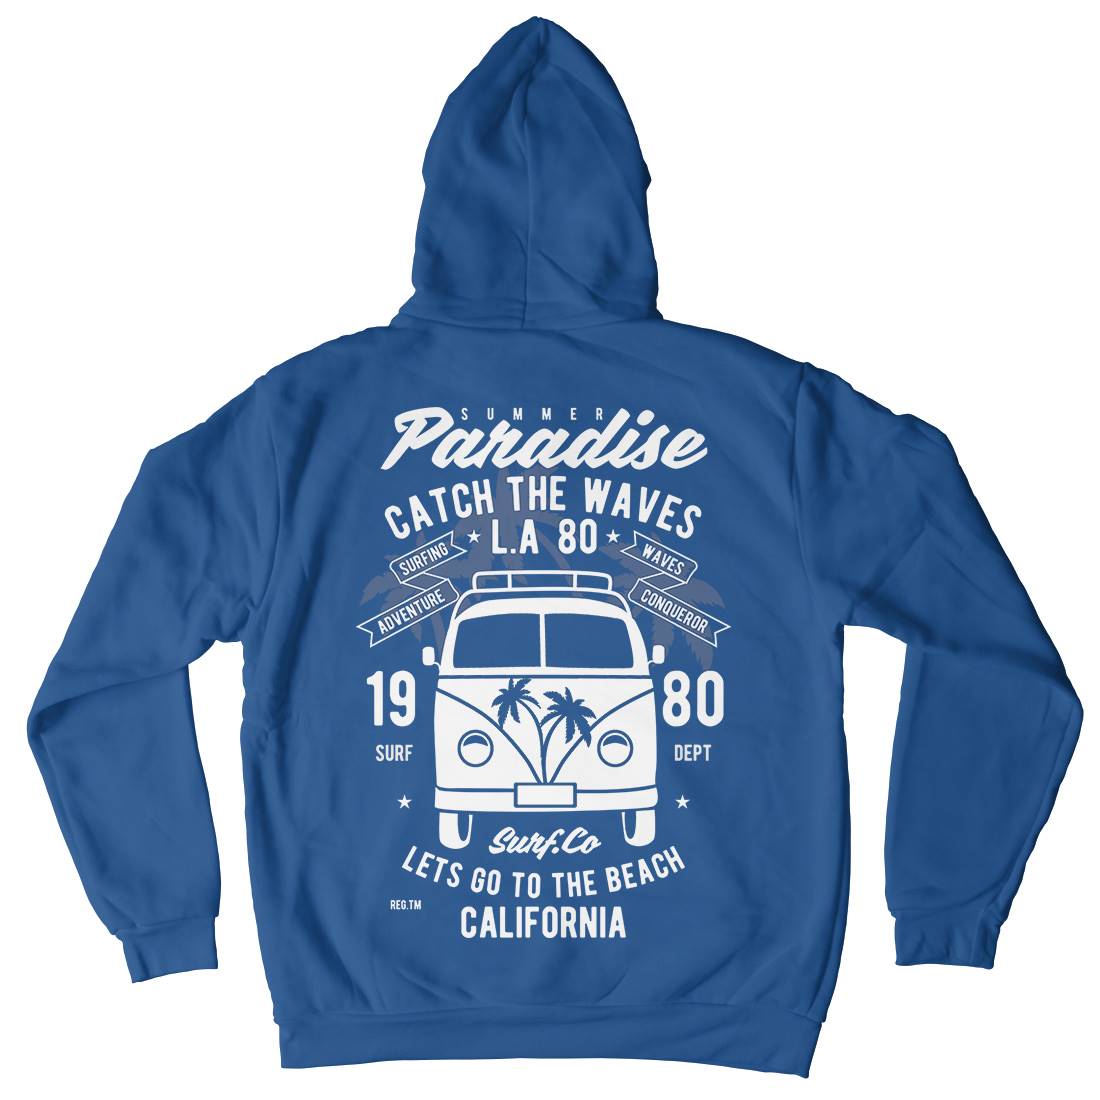 Catch The Waves Surfing Van Mens Hoodie With Pocket Surf B393